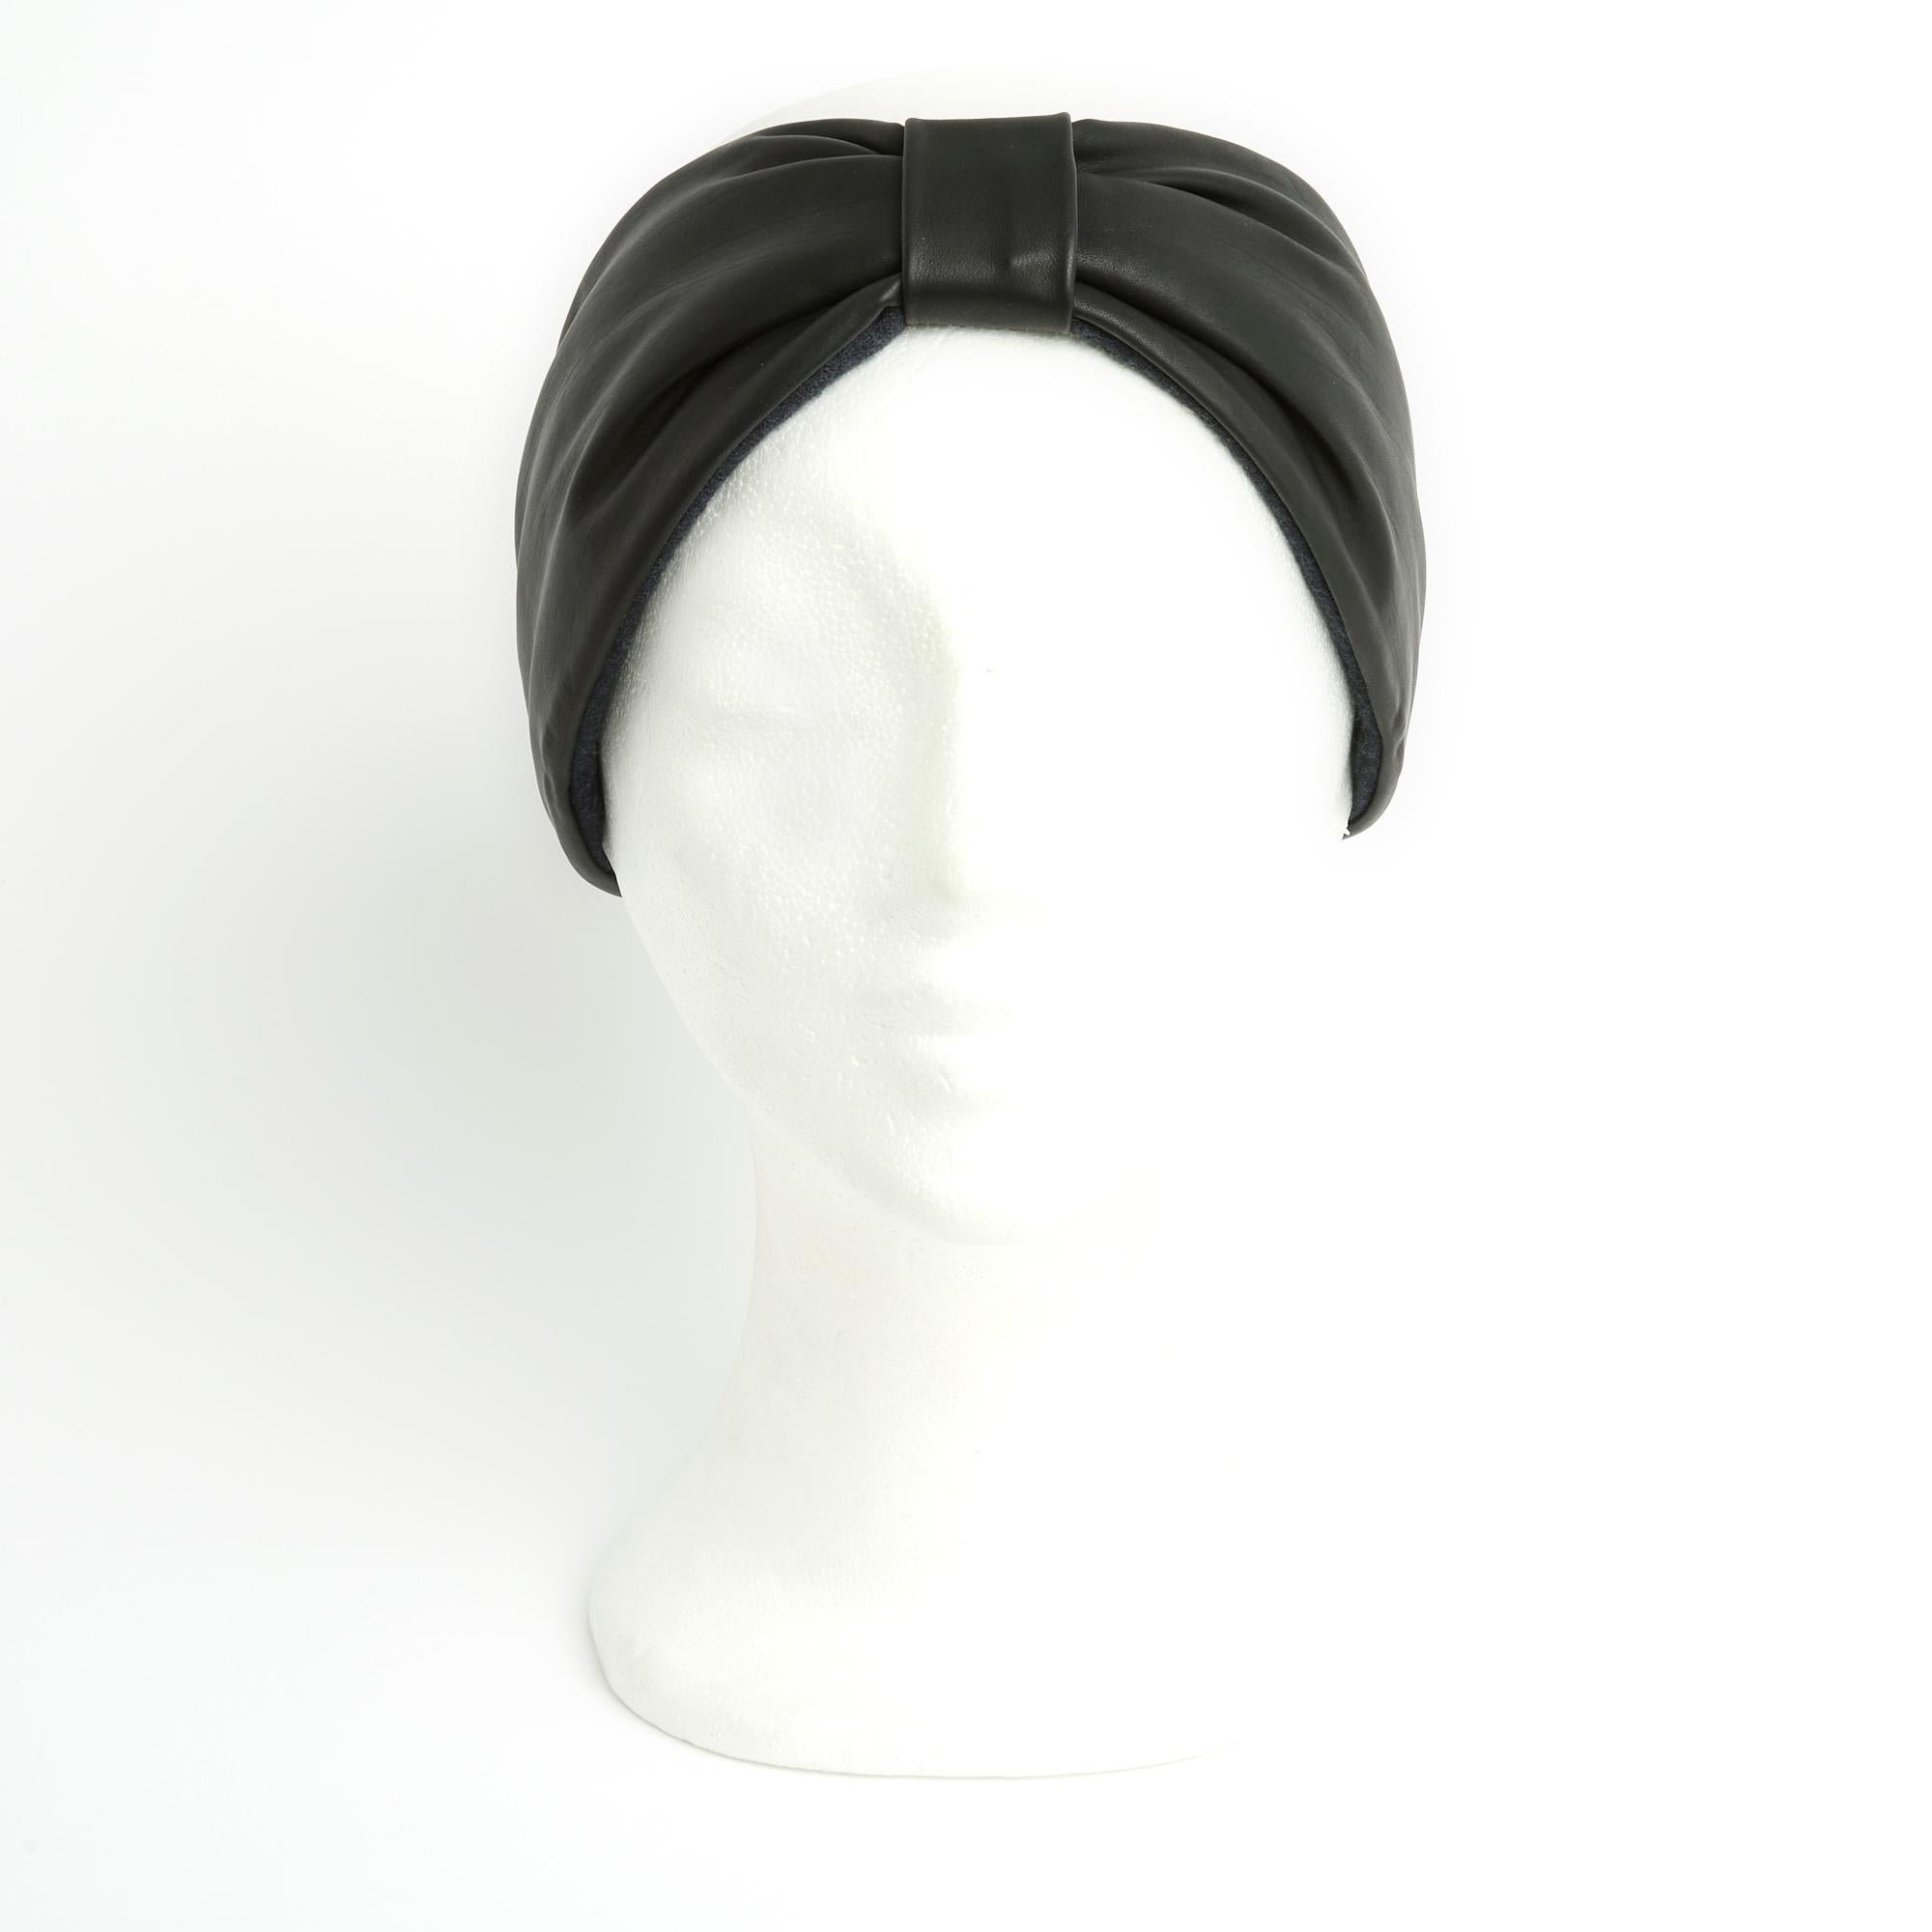 Hermès earmuff headband in soft slate gray (almost black) leather with elastic band (covered in leather) at the back, matching cashmere lining. Size M. The headband appears new, vintage, delivered in its original box, warm and magnificent when worn.